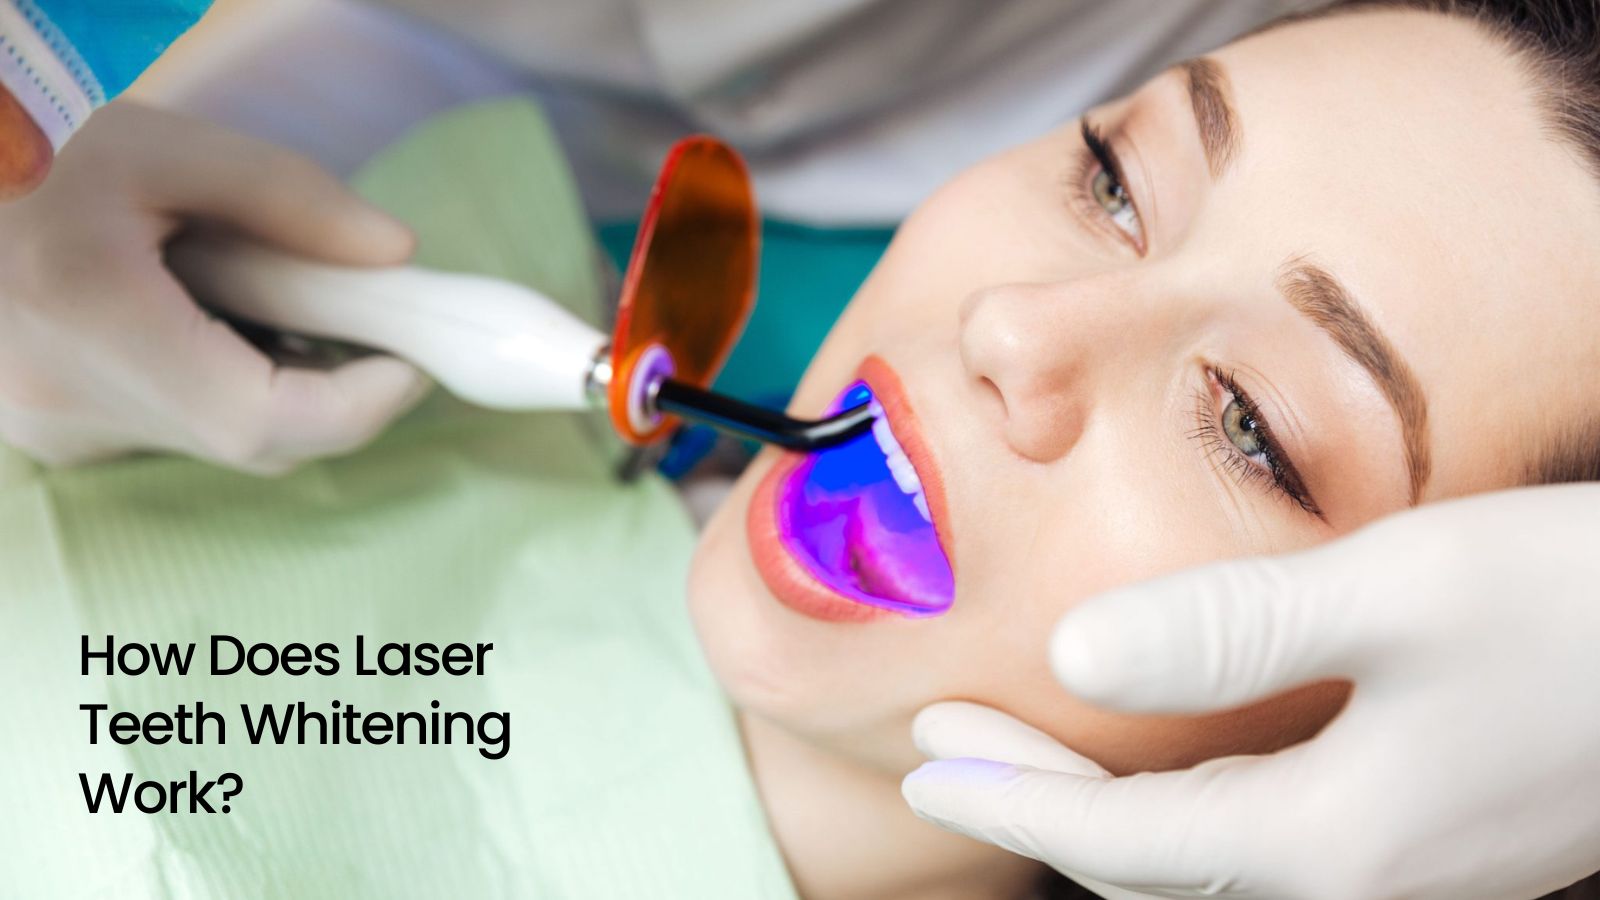 How Does Laser Teeth Whitening Work?